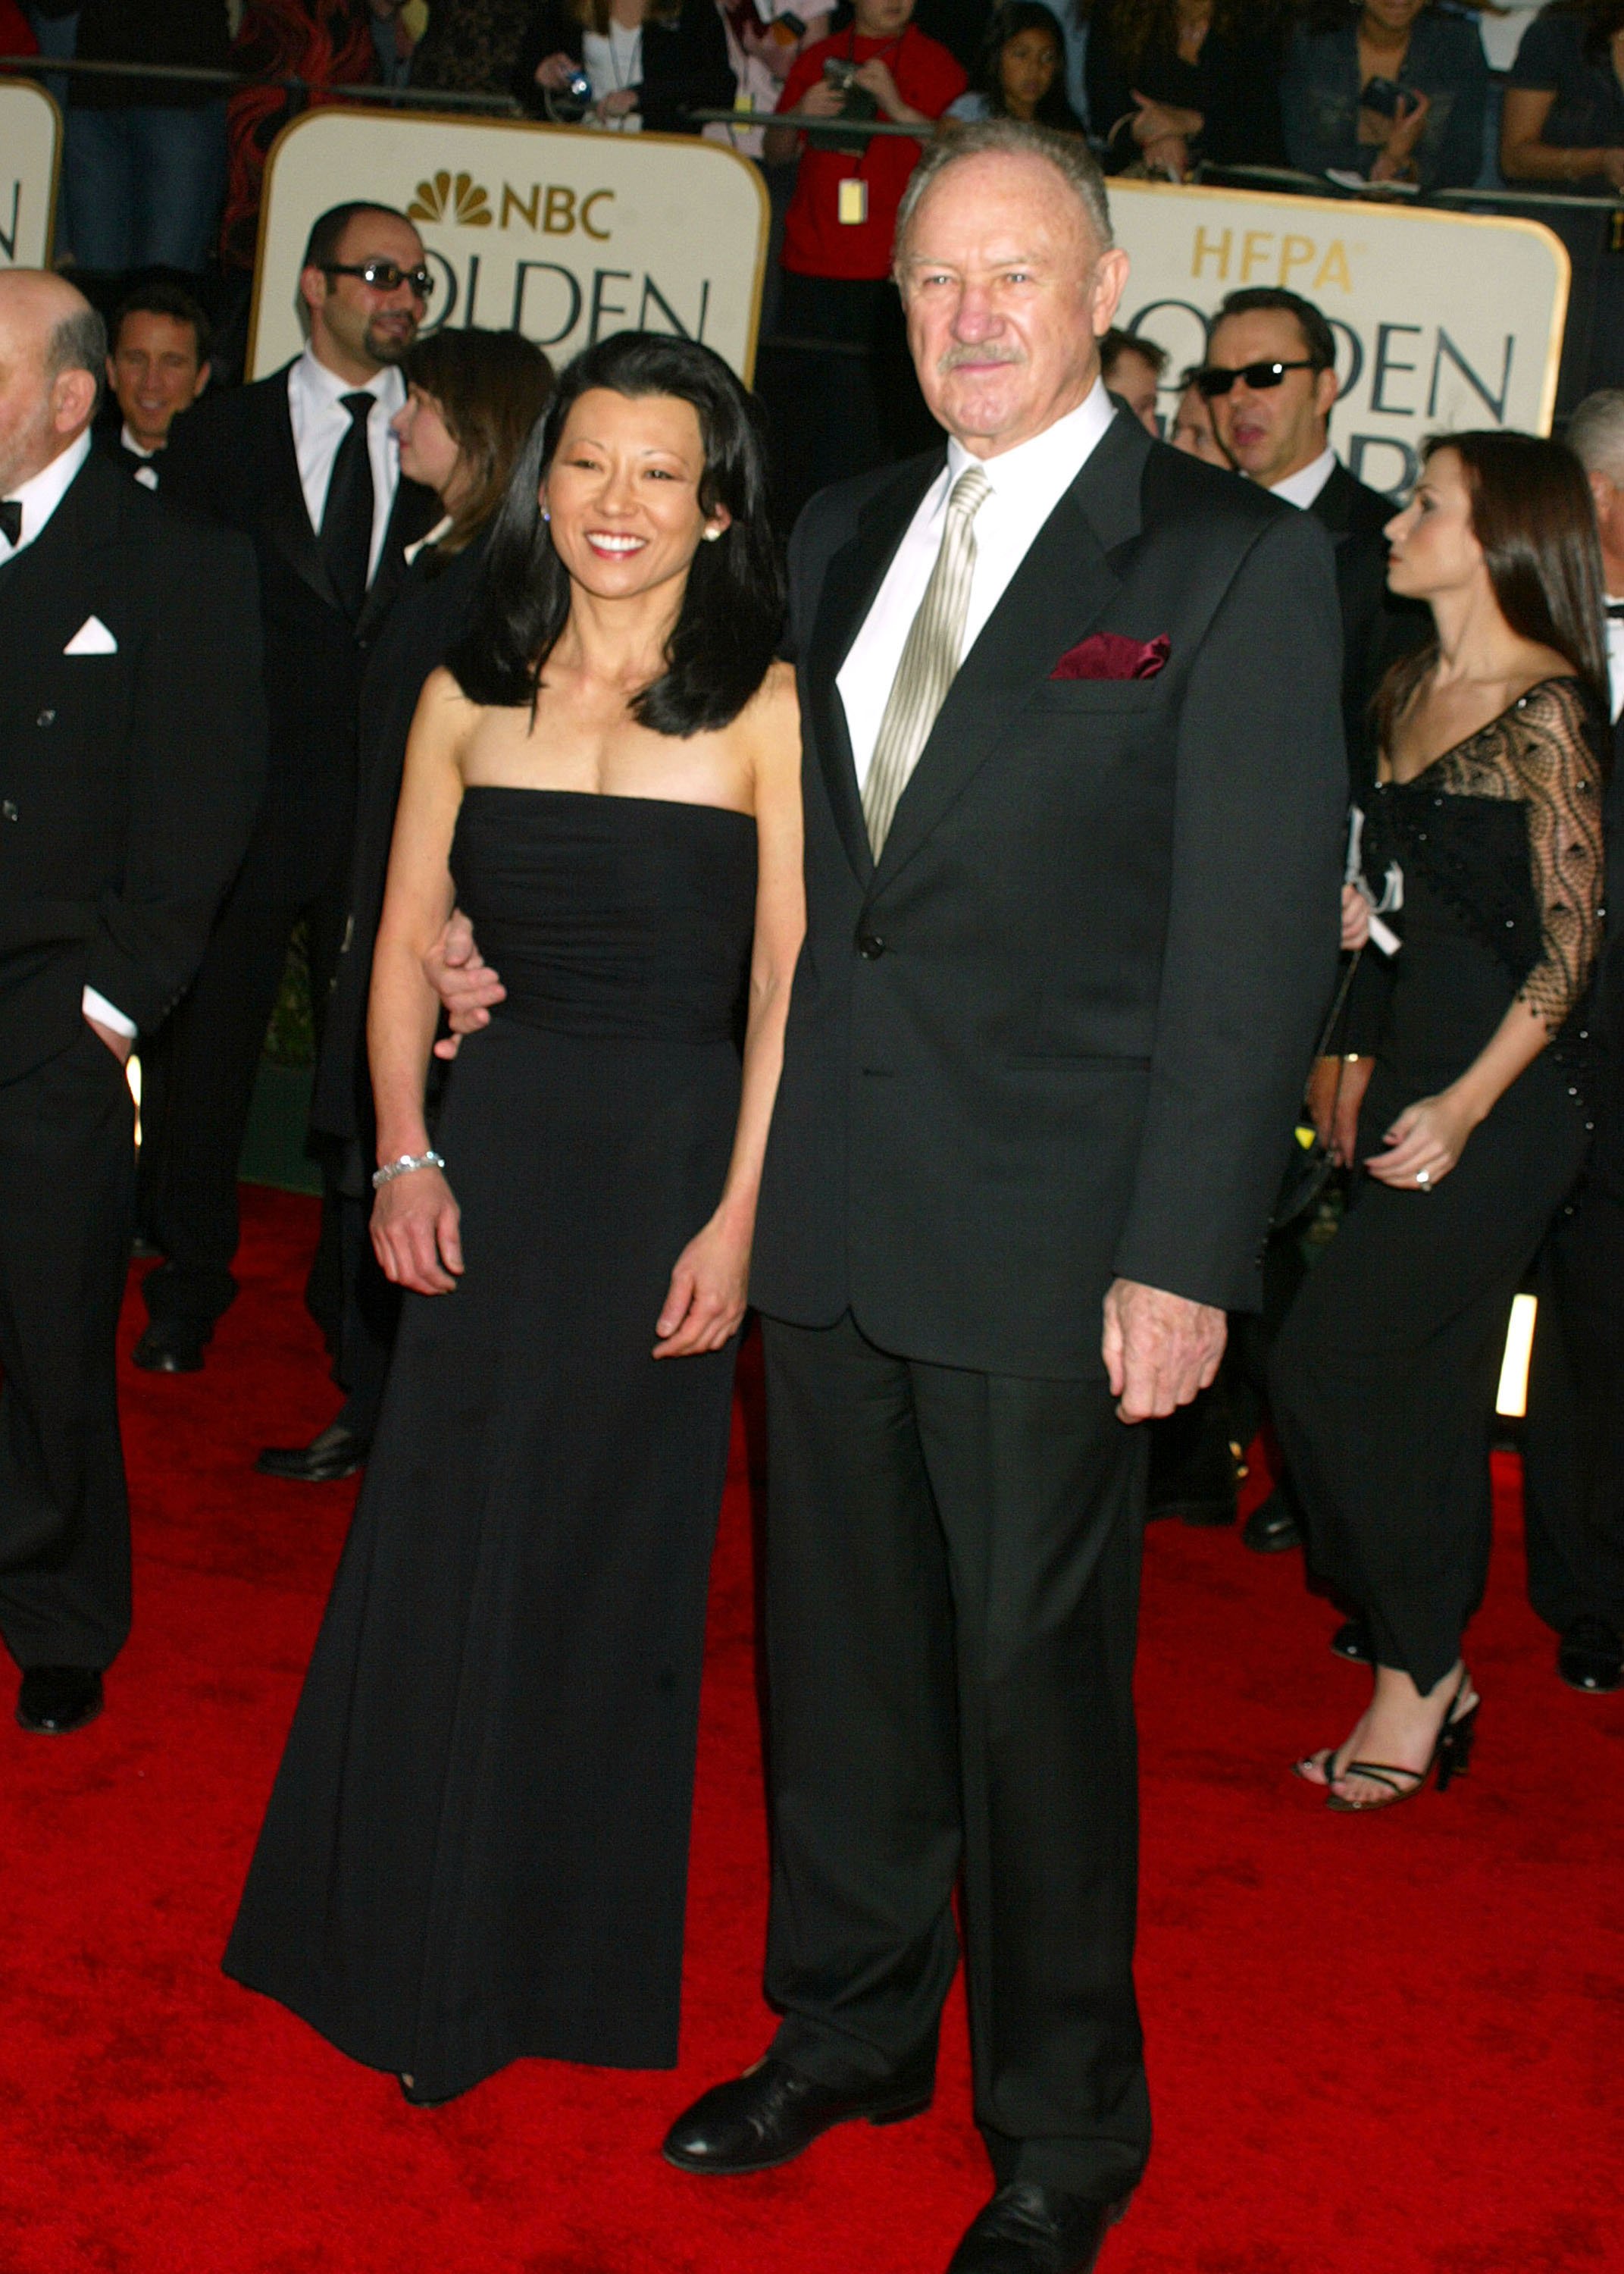 Gene Hackman & wife Betsy Arakawa during The 60th Annual Golden Globe Awards - Arrivals at The Beverly Hilton Hotel in Beverly Hills, California, United States | Source: Getty Images